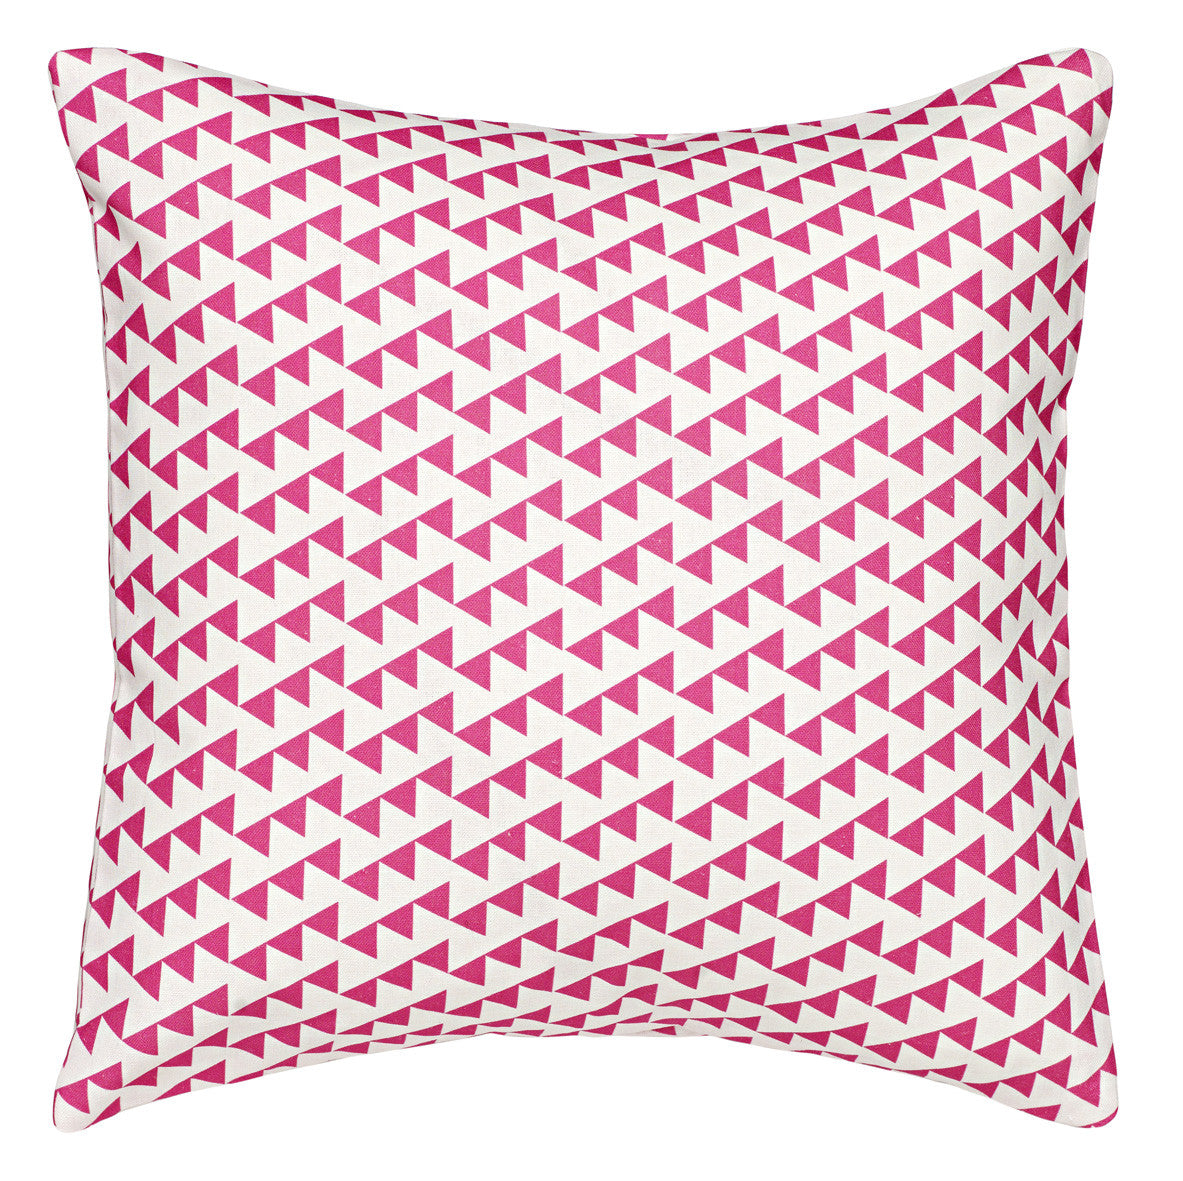 Bunting Geometric Pattern Cotton Linen Decorative Throw Pillow  in Bright Fuchsia Pink 45x45cm (18x18") ships from Canada worldwide including the USA